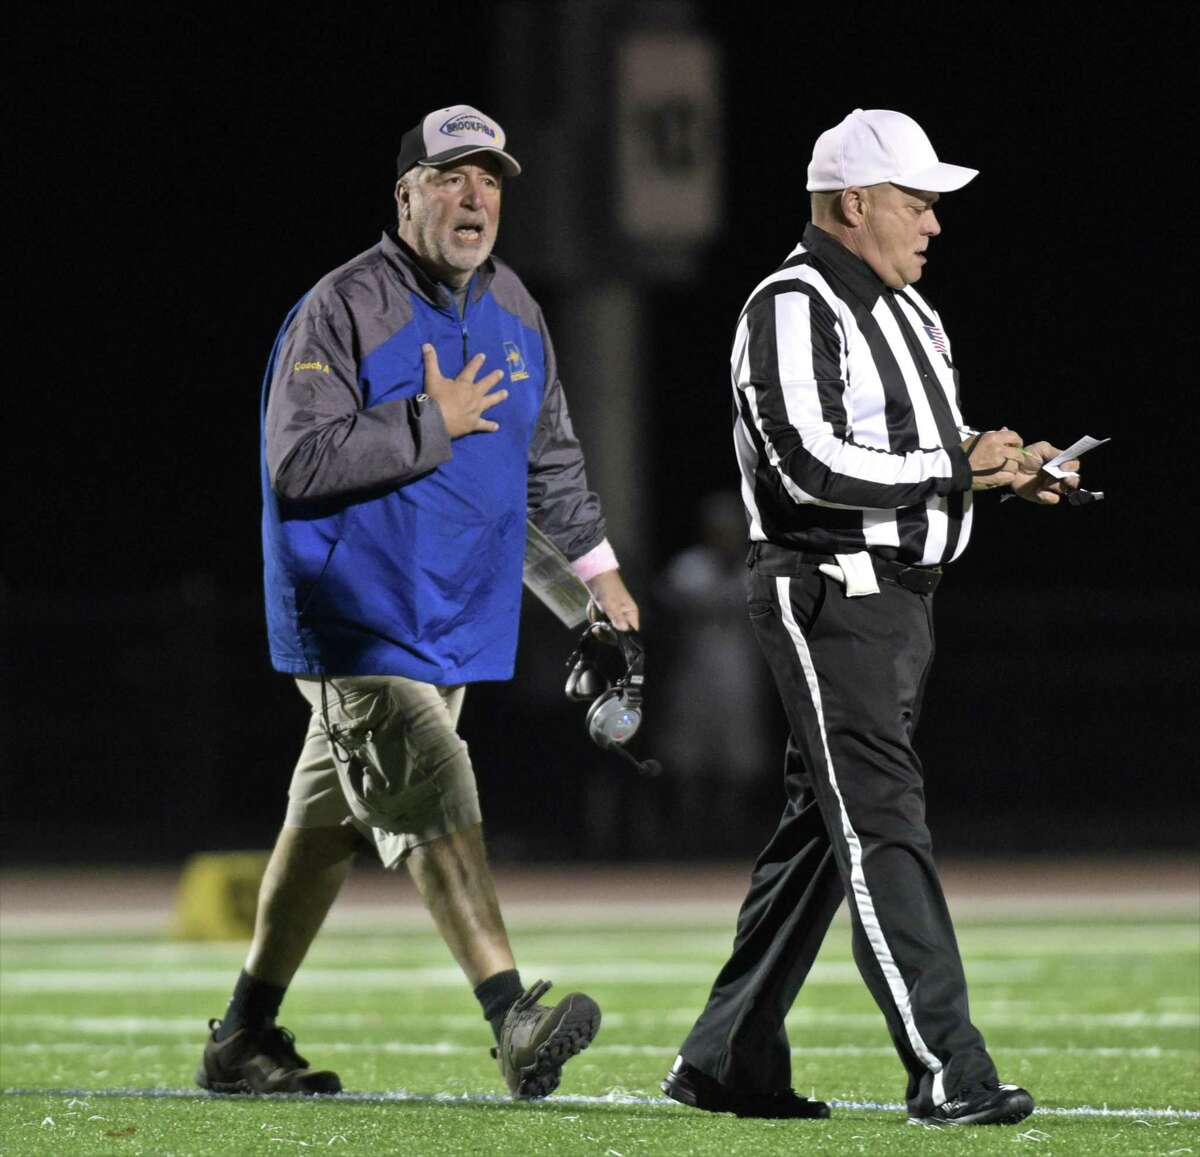 Brookfield coach Rich Angarano will lead the Bobcats against the SCC’s Hillhouse on Friday before hosting North Haven in Week 5.